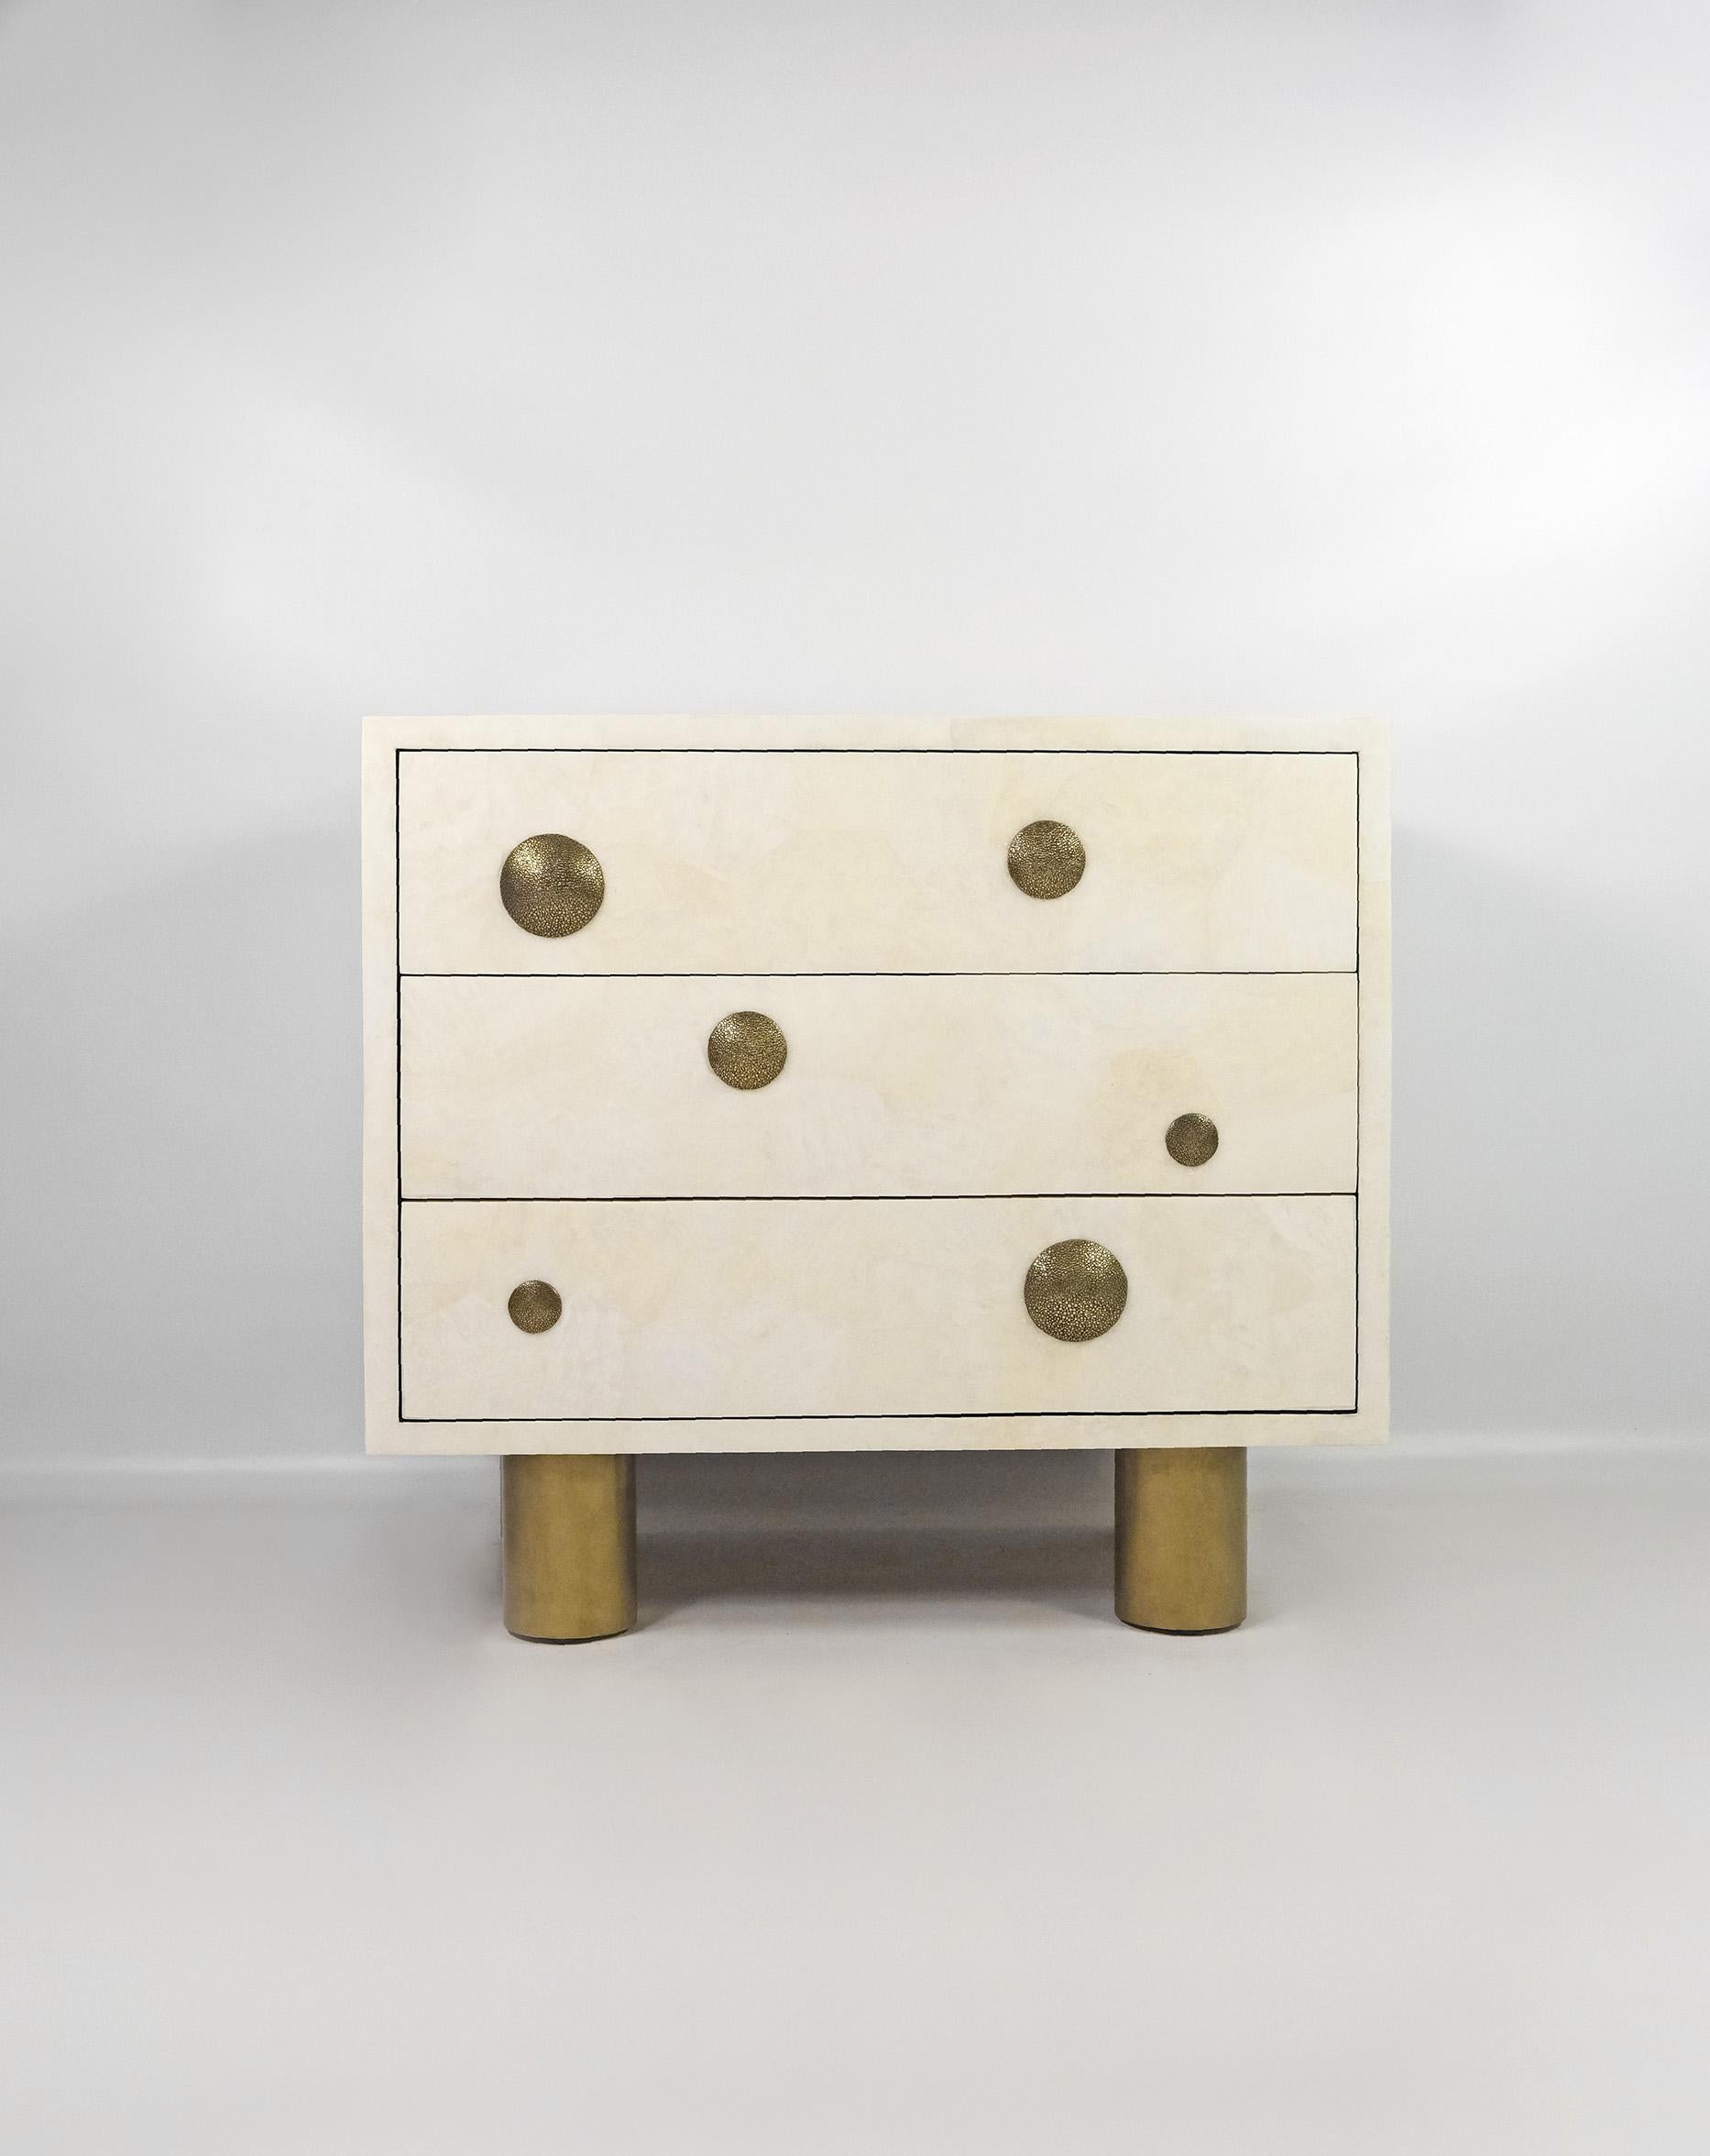 The bedside table is made of white rock crystal marquetry with a polished satin finish.
It has 3 drawers on push to open rails, with casted bronze decors. 
The nightstands seats on four cylinder legs finished with an antic brass patina.

The